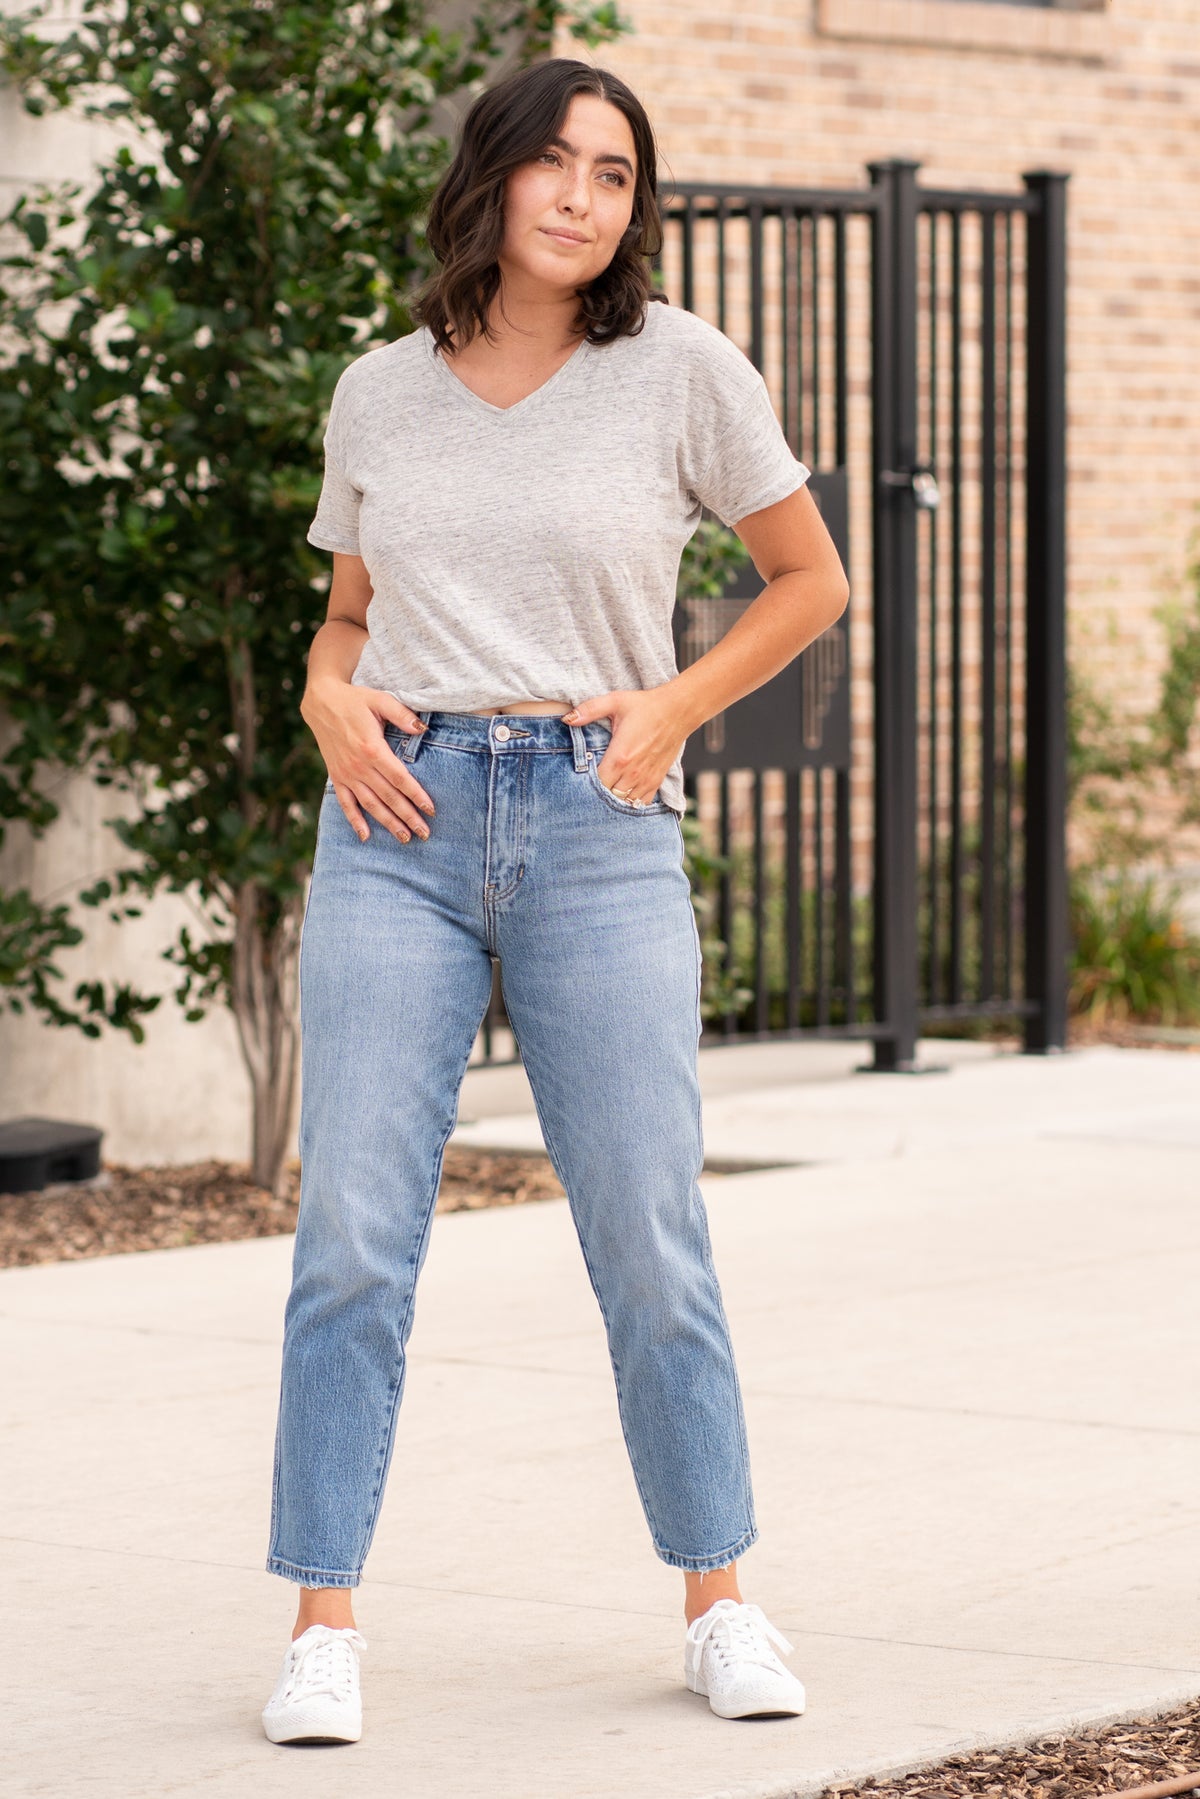 KanCan Jeans  These high-rise slouch fit hit at exactly the right spot on your waist and with some spandex, these will stretch as you wear and get super comfy!   KanCan Stretch Level: Comfort Stretch   Color: Medium Blue Wash Cut: Slouchy Straight, 28" Inseam Rise: High-Rise, 11.25" Front Rise 99% COTTON , 1% SPANDEX Stitching: Classic  Fly: Zipper Style #: KC9271M Contact us for any additional measurements or sizing. 